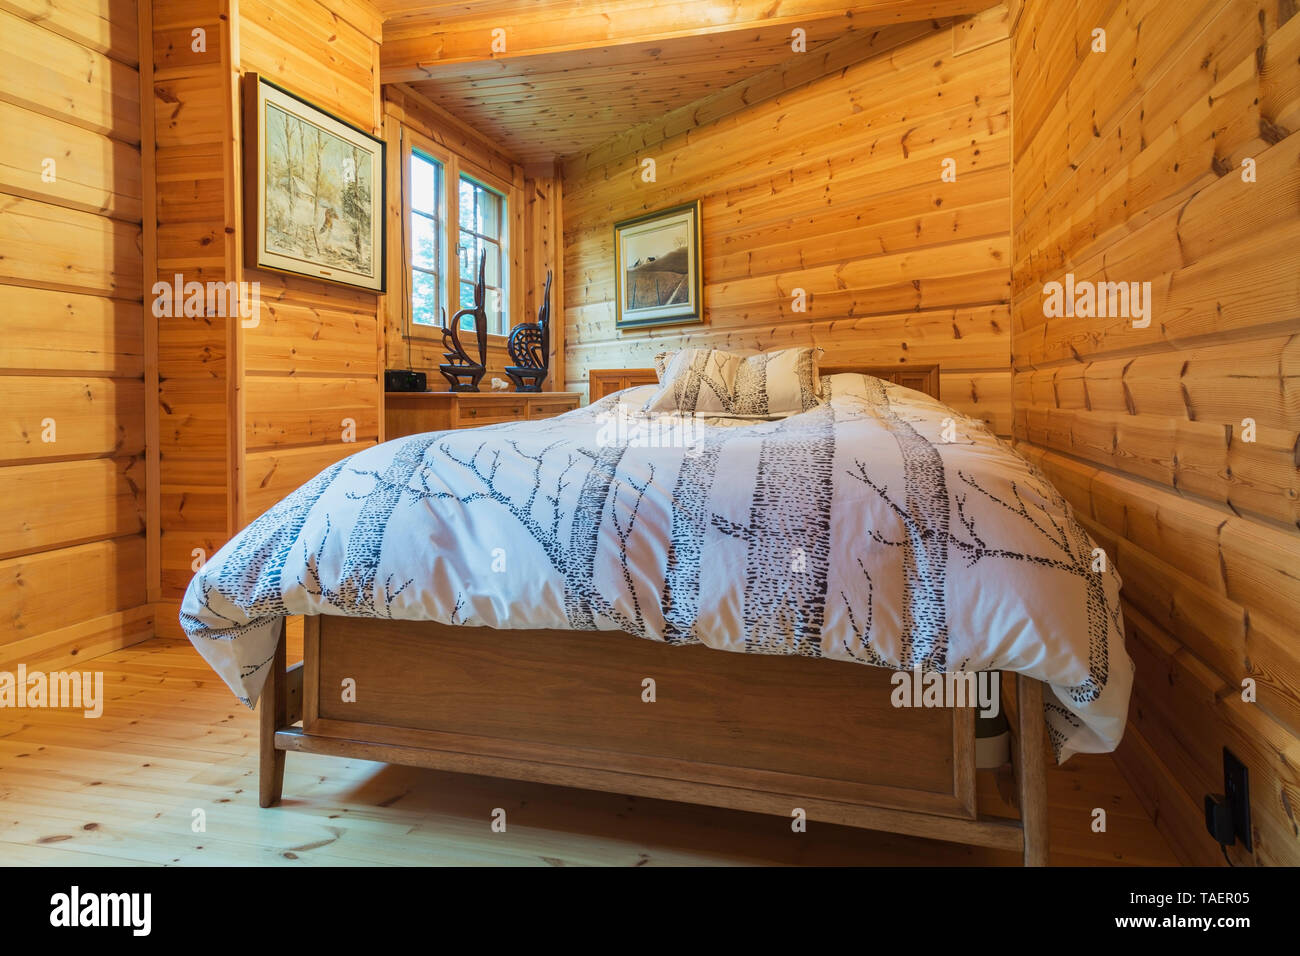 Queen size bed with wood frame and striped bedspread and matching pillows in long and narrow bedroom inside a piece sur piece Scots pine log home, Quebec, Canada. This image is property released. CUPR0334 Stock Photo